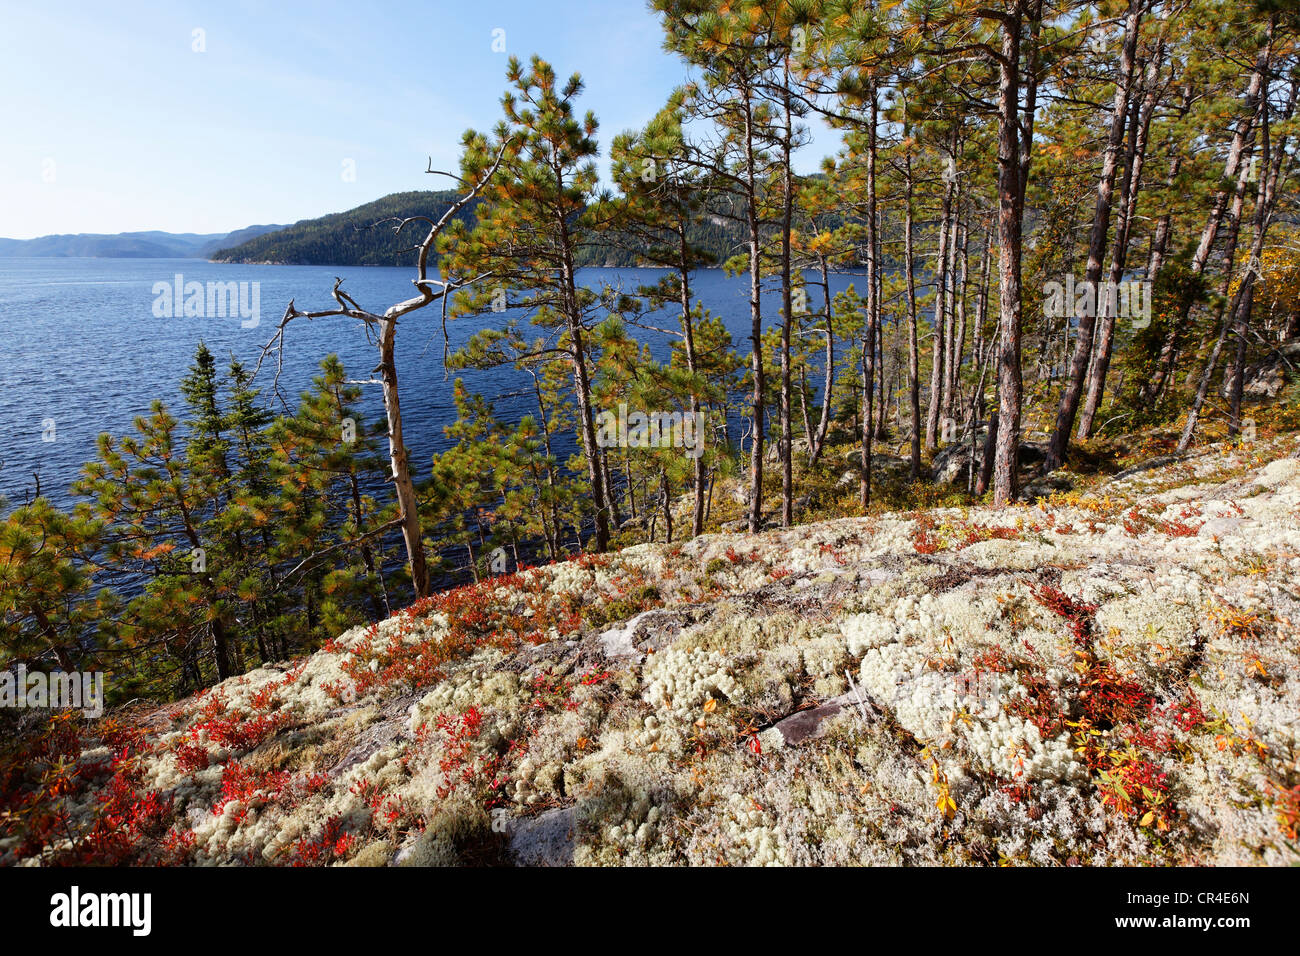 Forest with Red pine or Norway pine (Pinus resinosa), St. Catherine Bay, Quebec, Canada Stock Photo